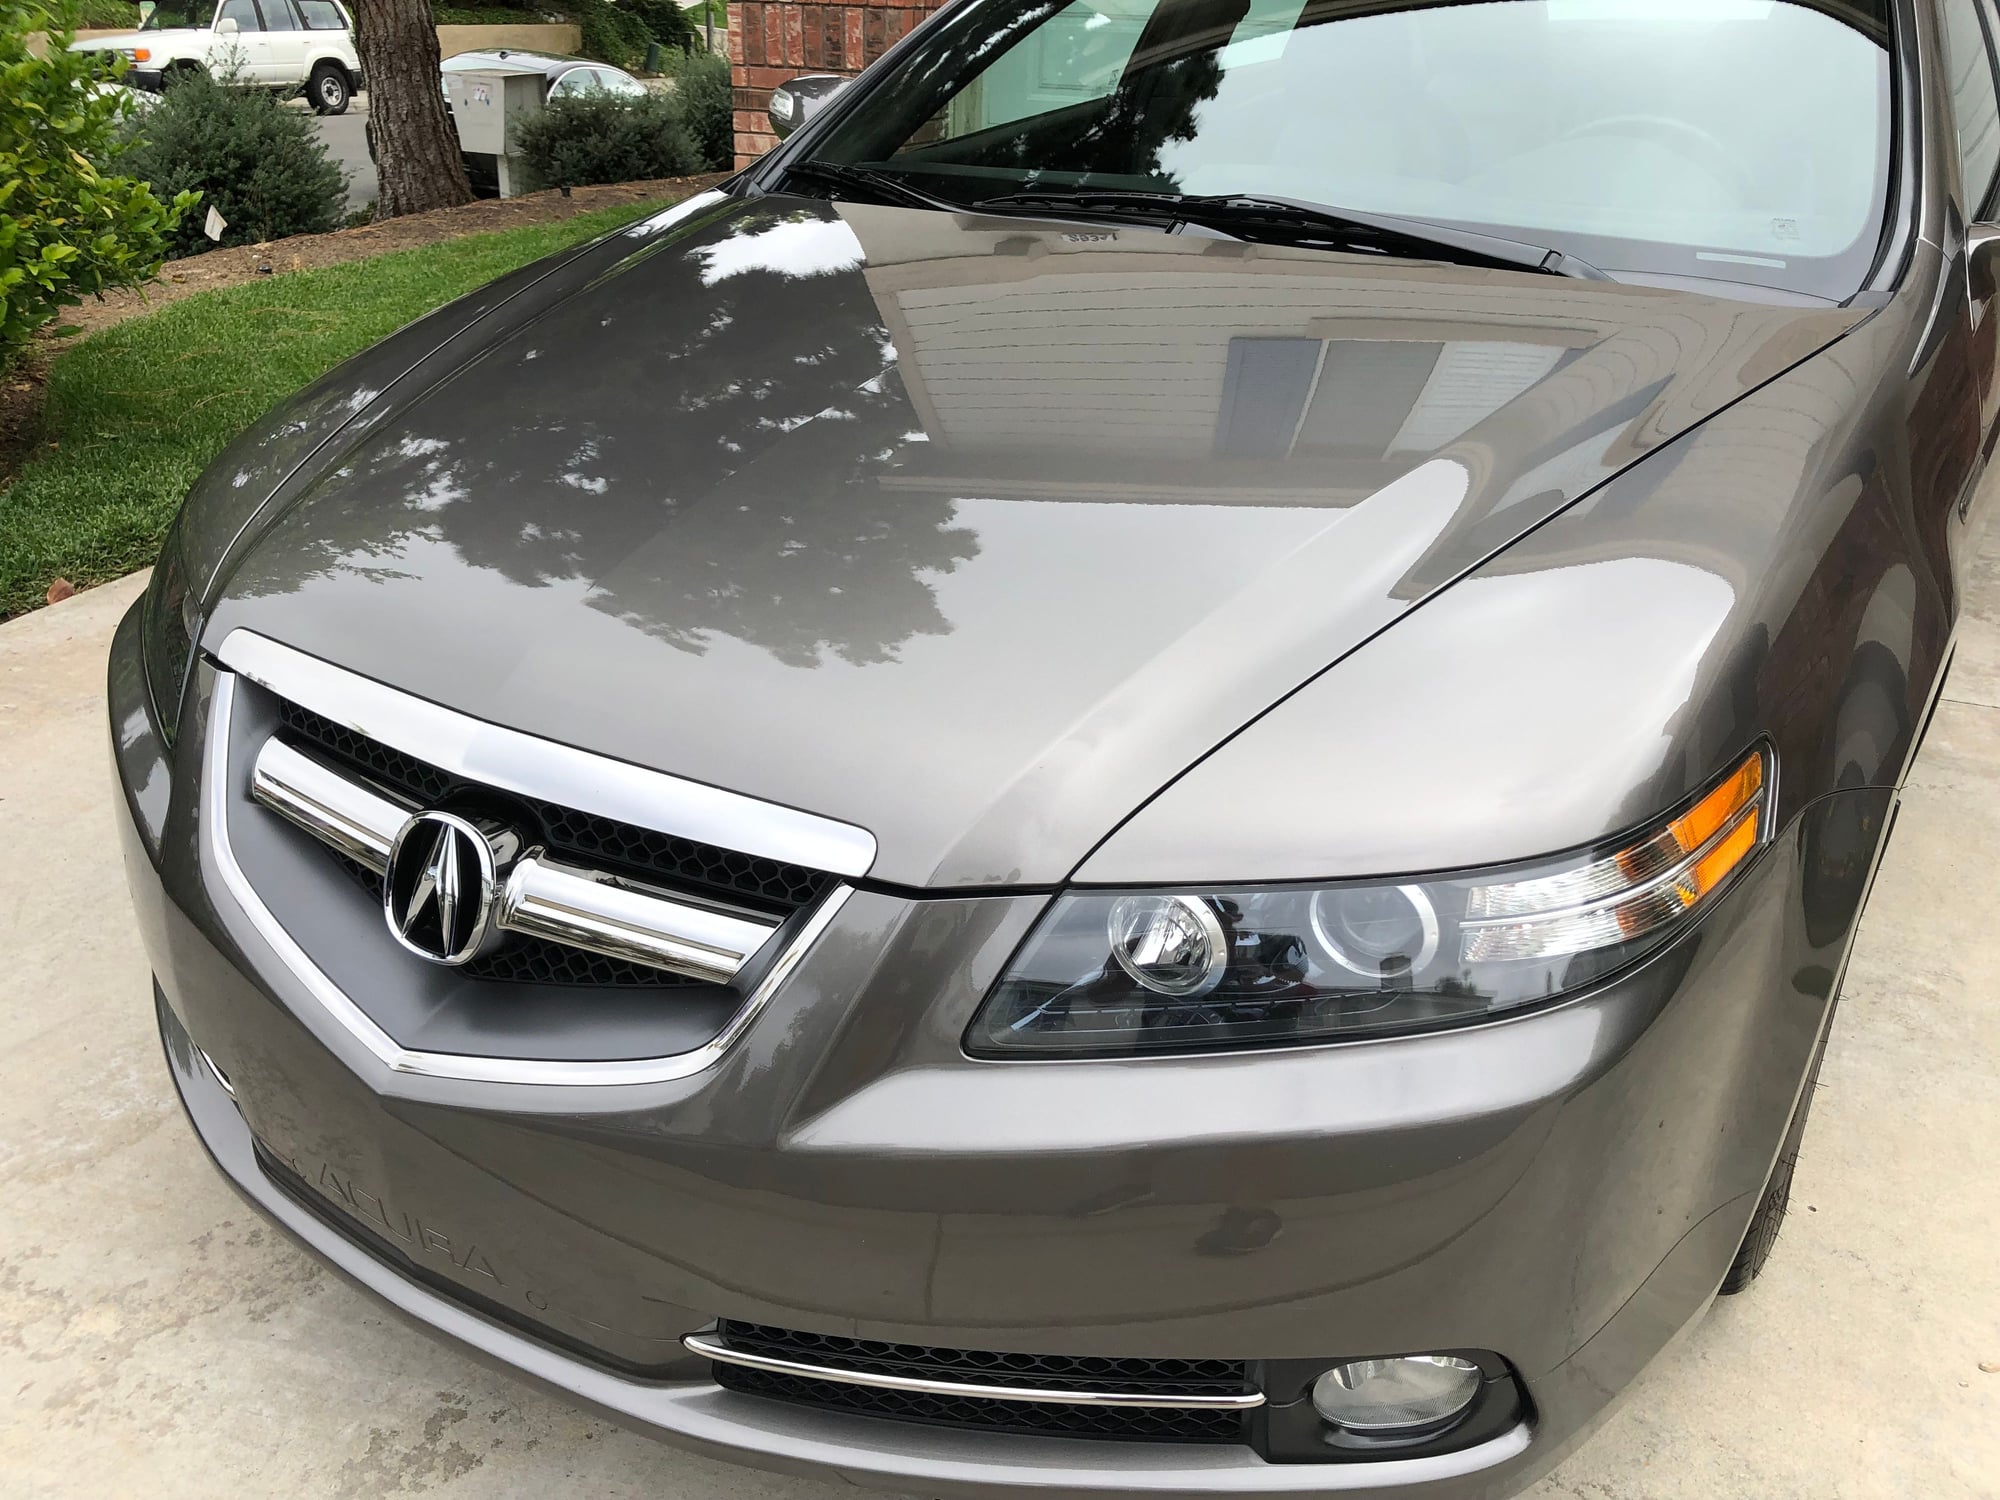 2008 Acura TL - FS: 2008 Acura TL Type-S with 46k miles - Used - VIN 19UUA76518A039049 - 46,834 Miles - 6 cyl - 2WD - Automatic - Sedan - Other - Carlsbad, CA 92009, United States